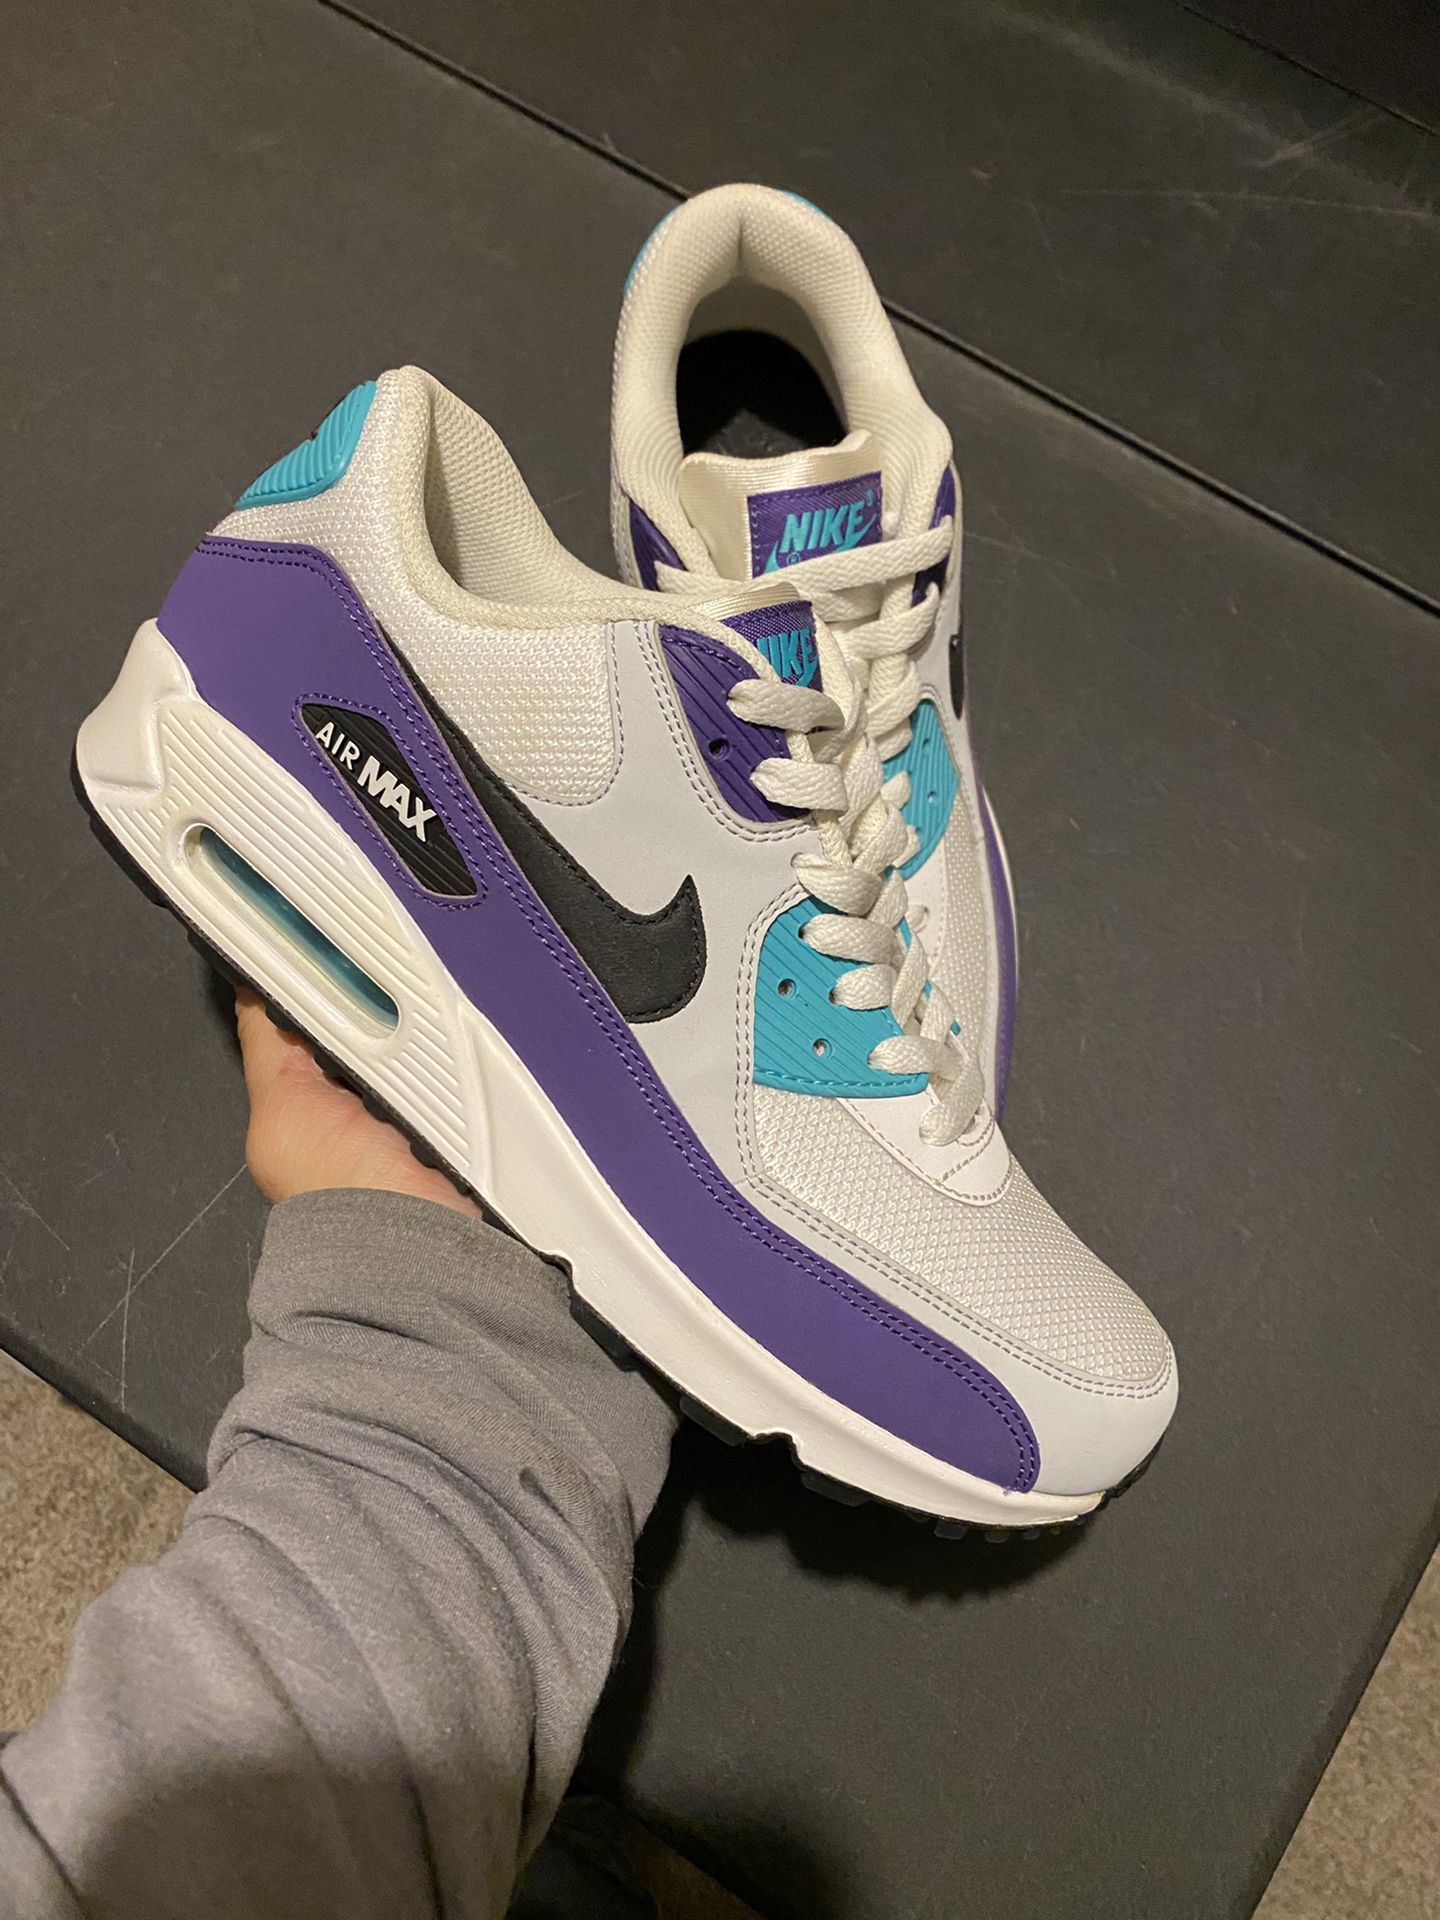 Verovering Lee hanger Nike Air Max 90 Grape size 9 PADS for Sale in Los Rnchs Abq, NM - OfferUp